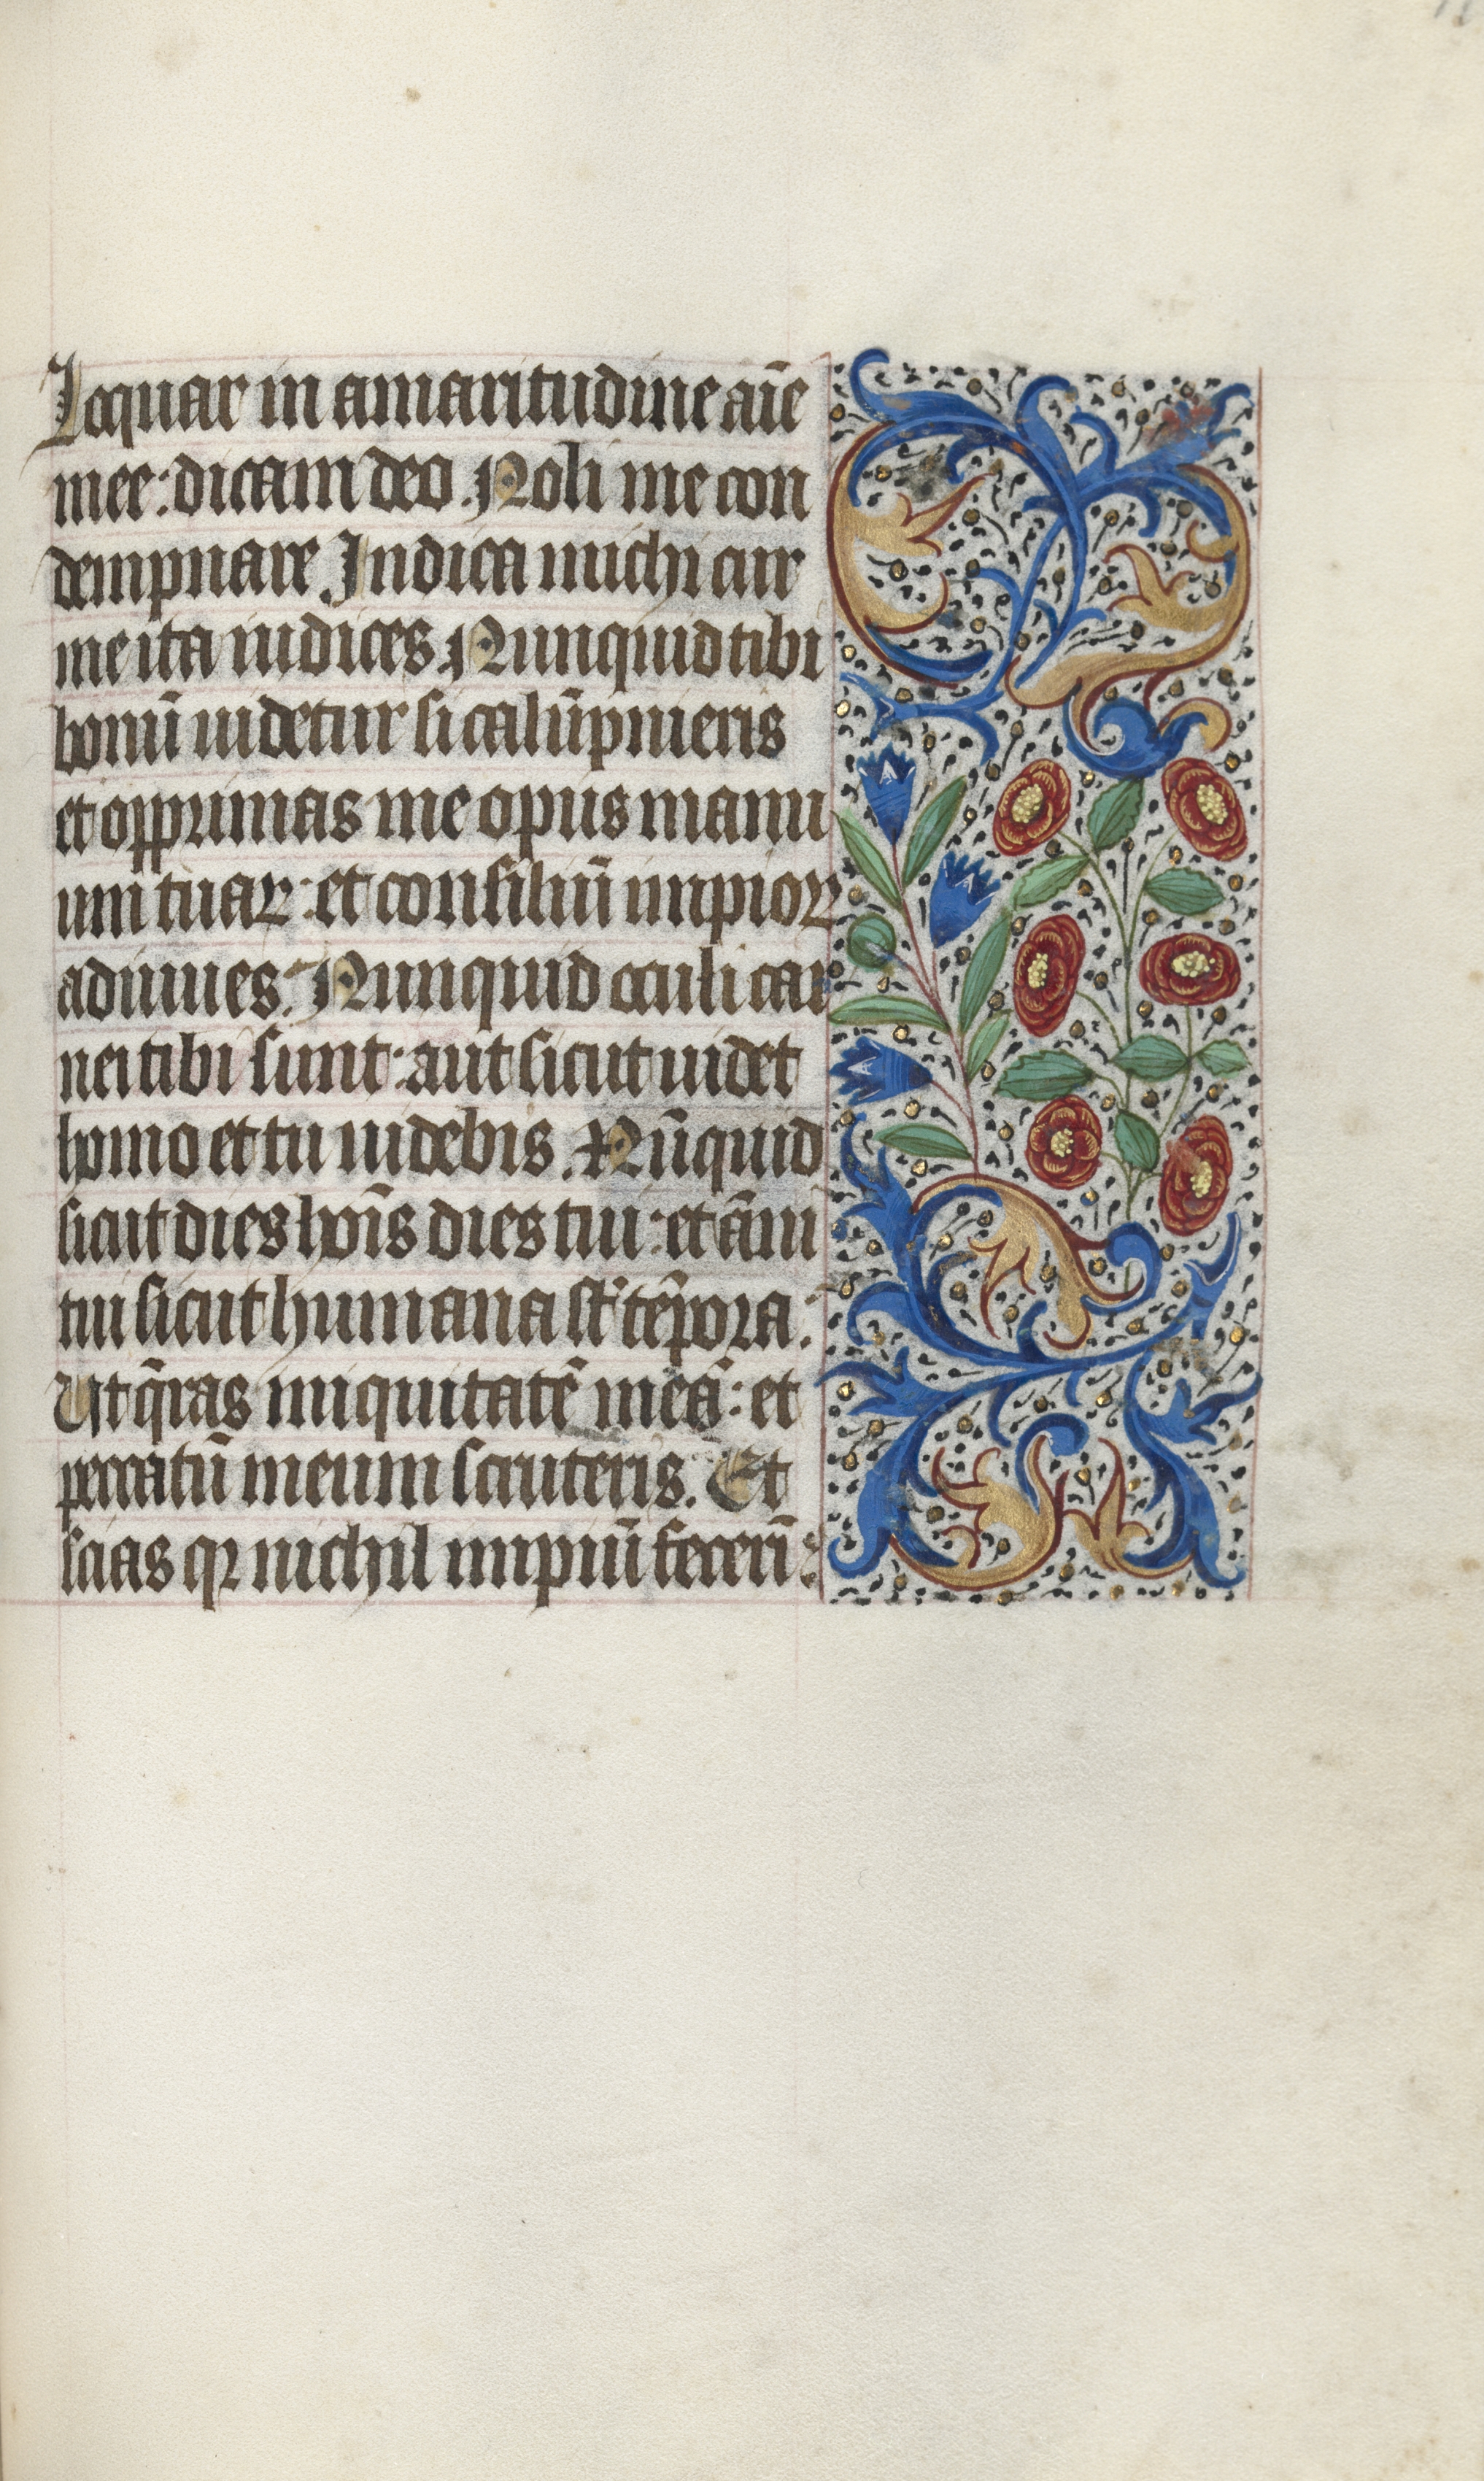 Book of Hours (Use of Rouen): fol. 116r